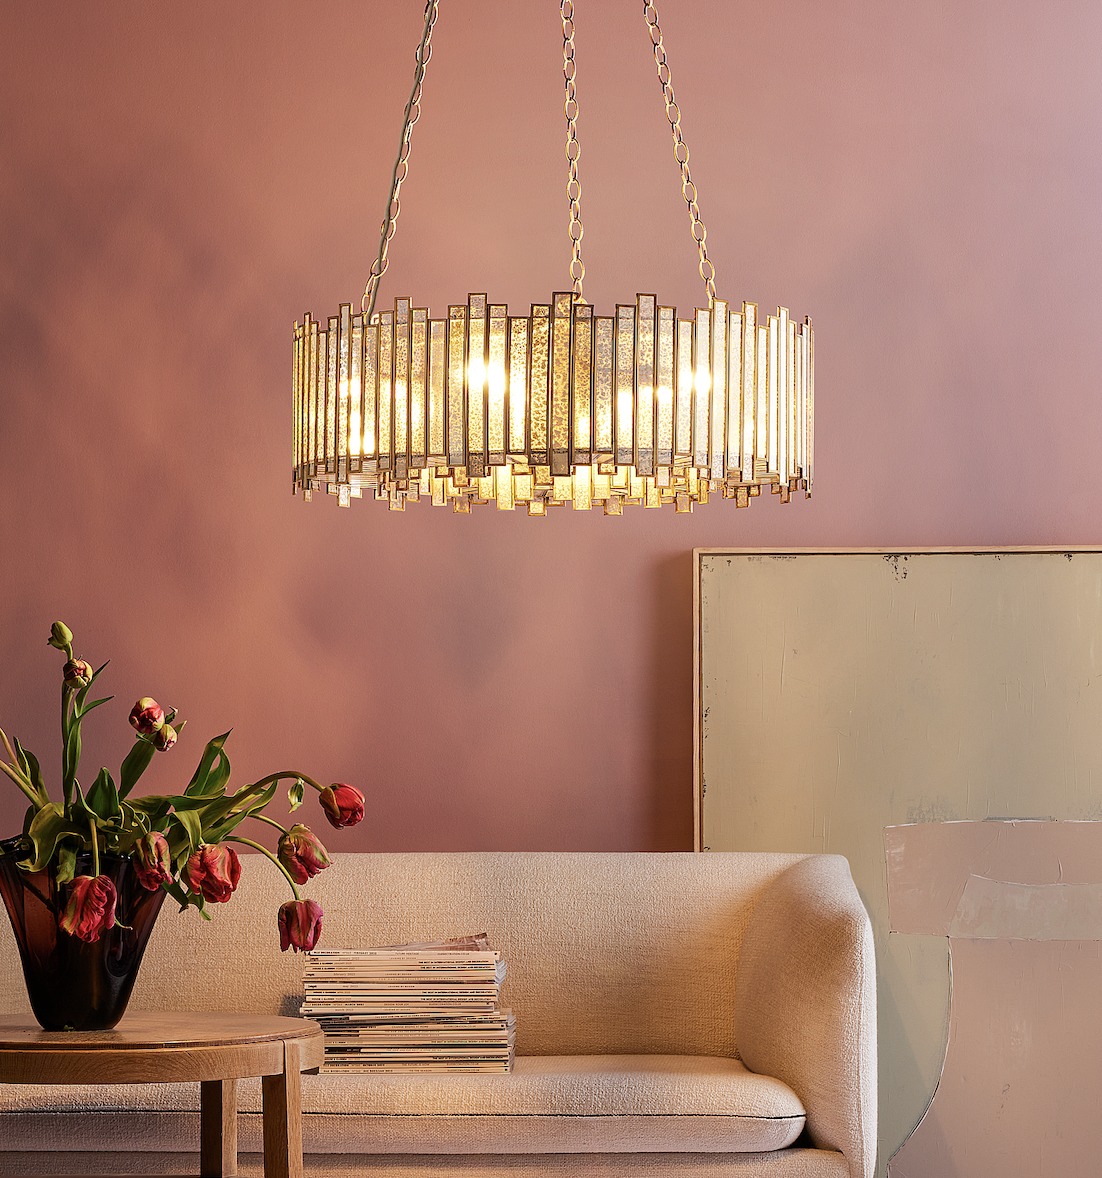 Pooky's best selling, five-star rated Melvillous Chandelier is coming to the US